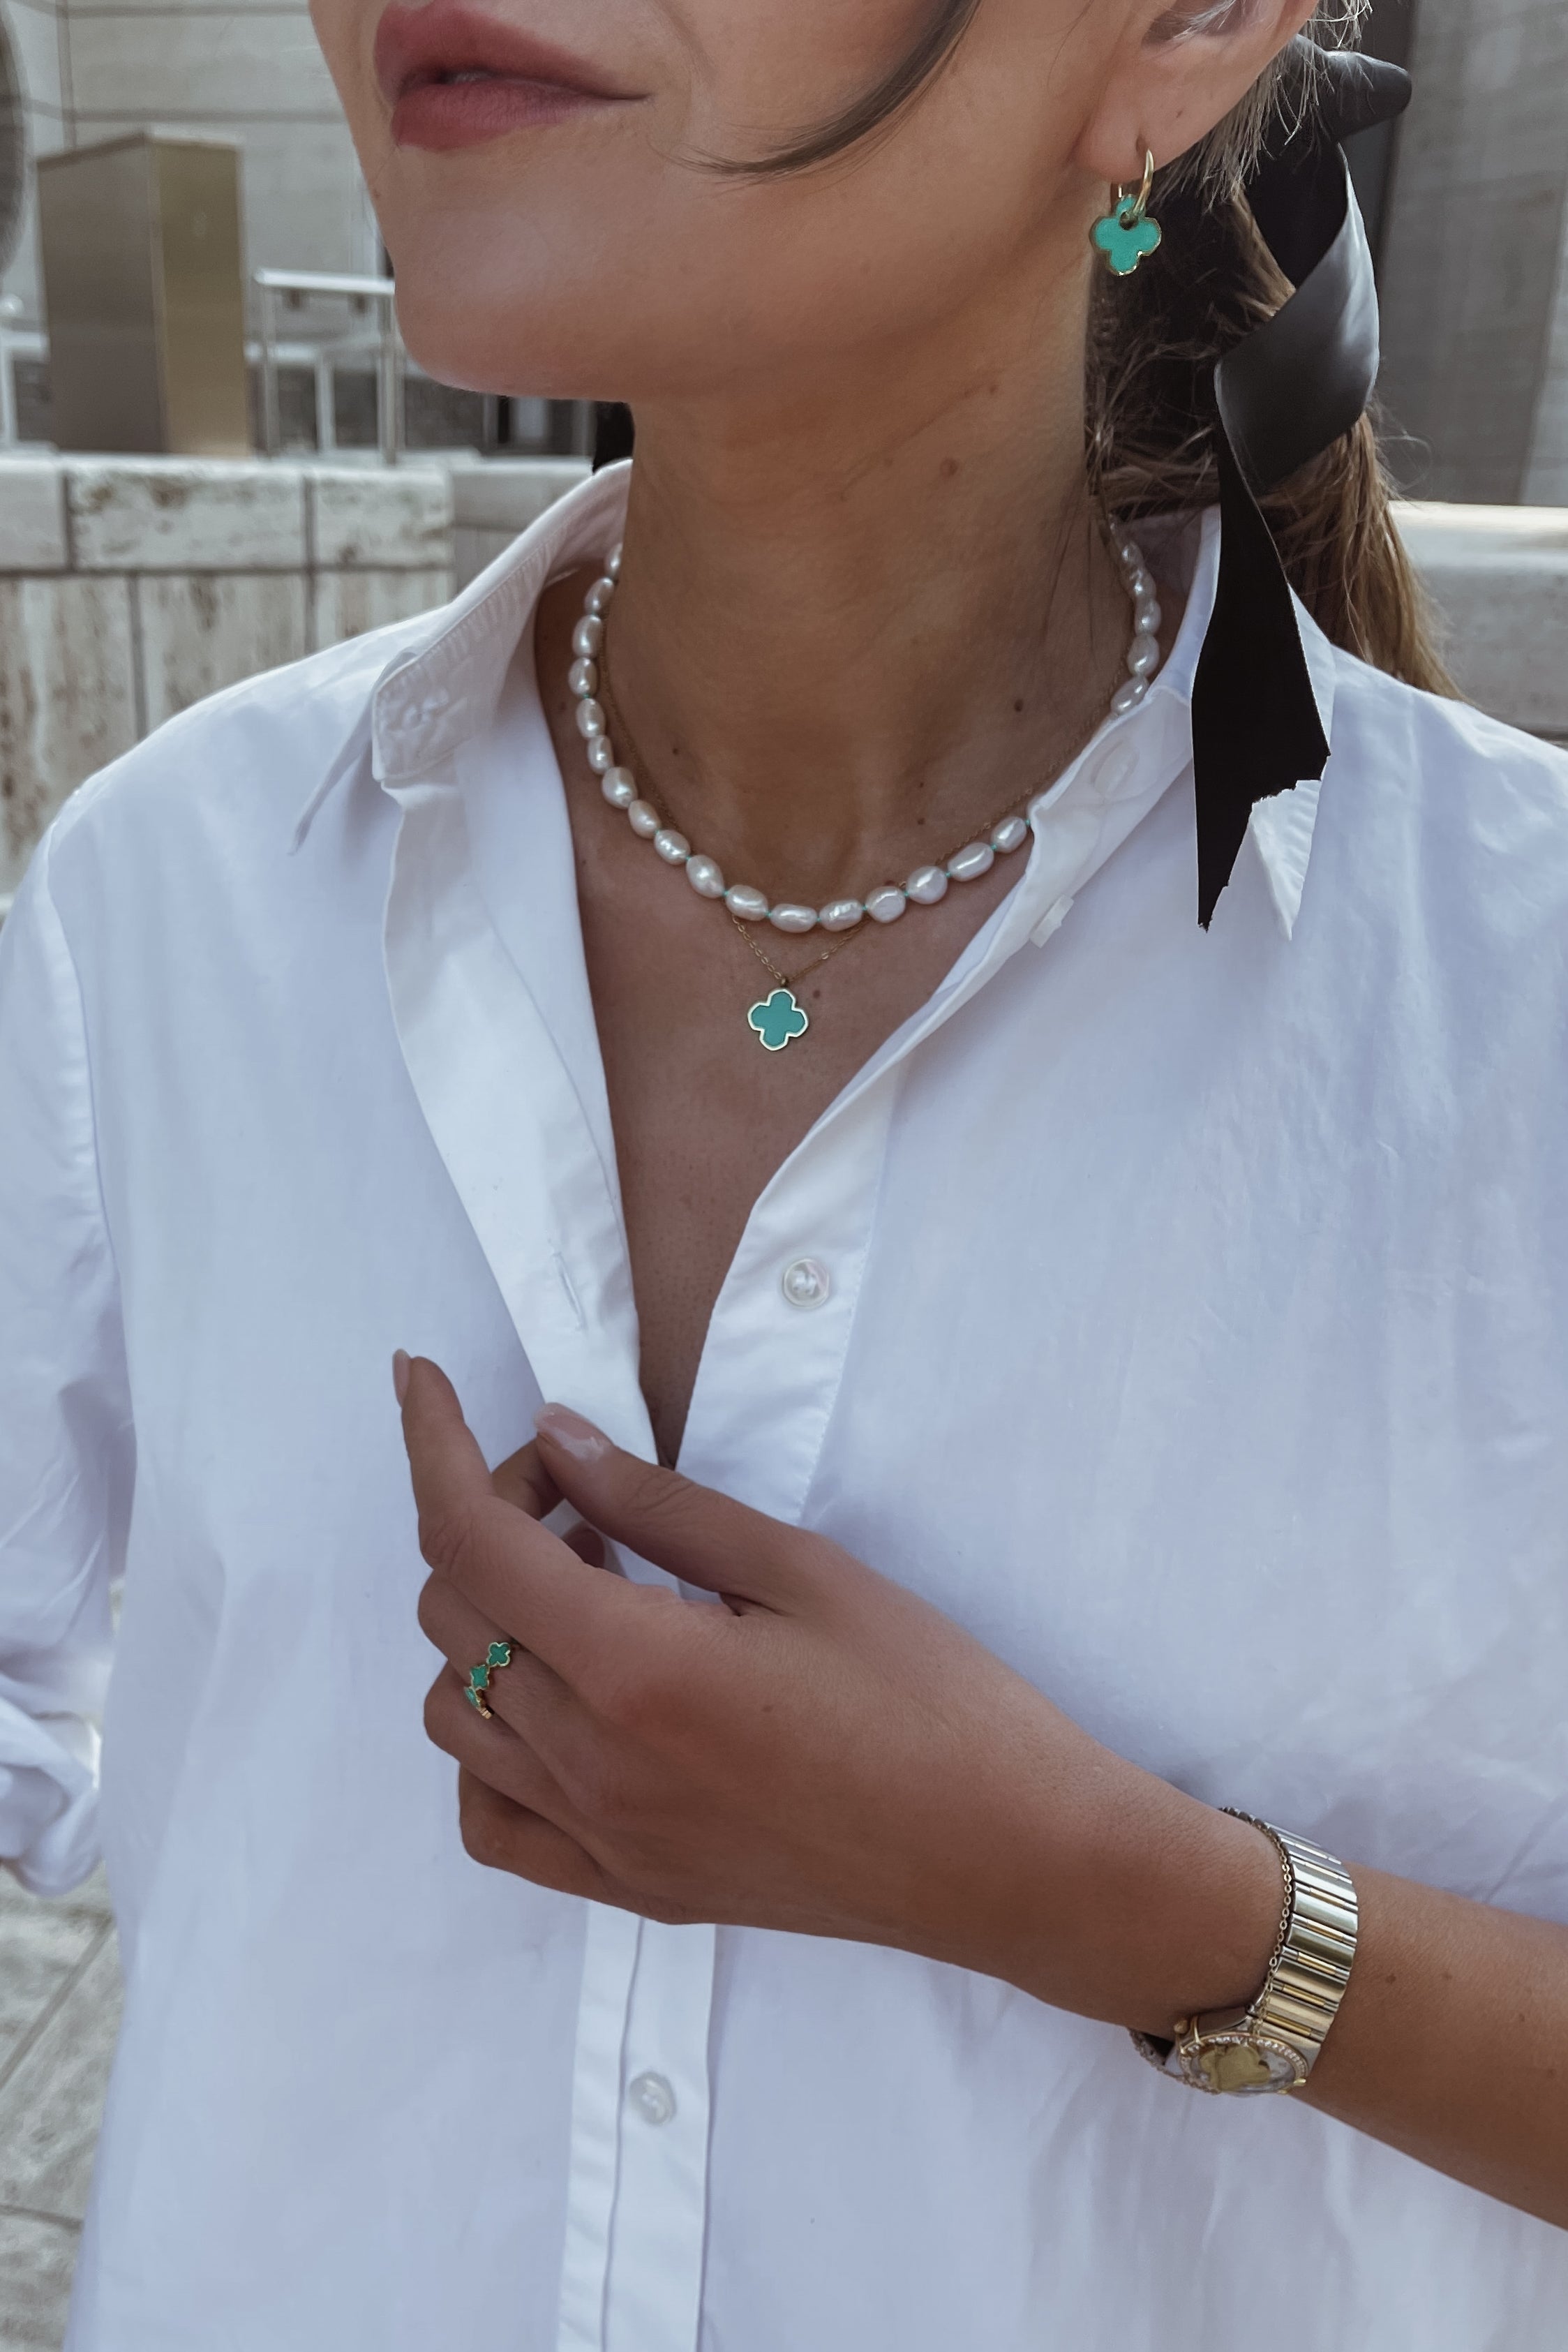 Whilhemina Necklace - Boutique Minimaliste has waterproof, durable, elegant and vintage inspired jewelry